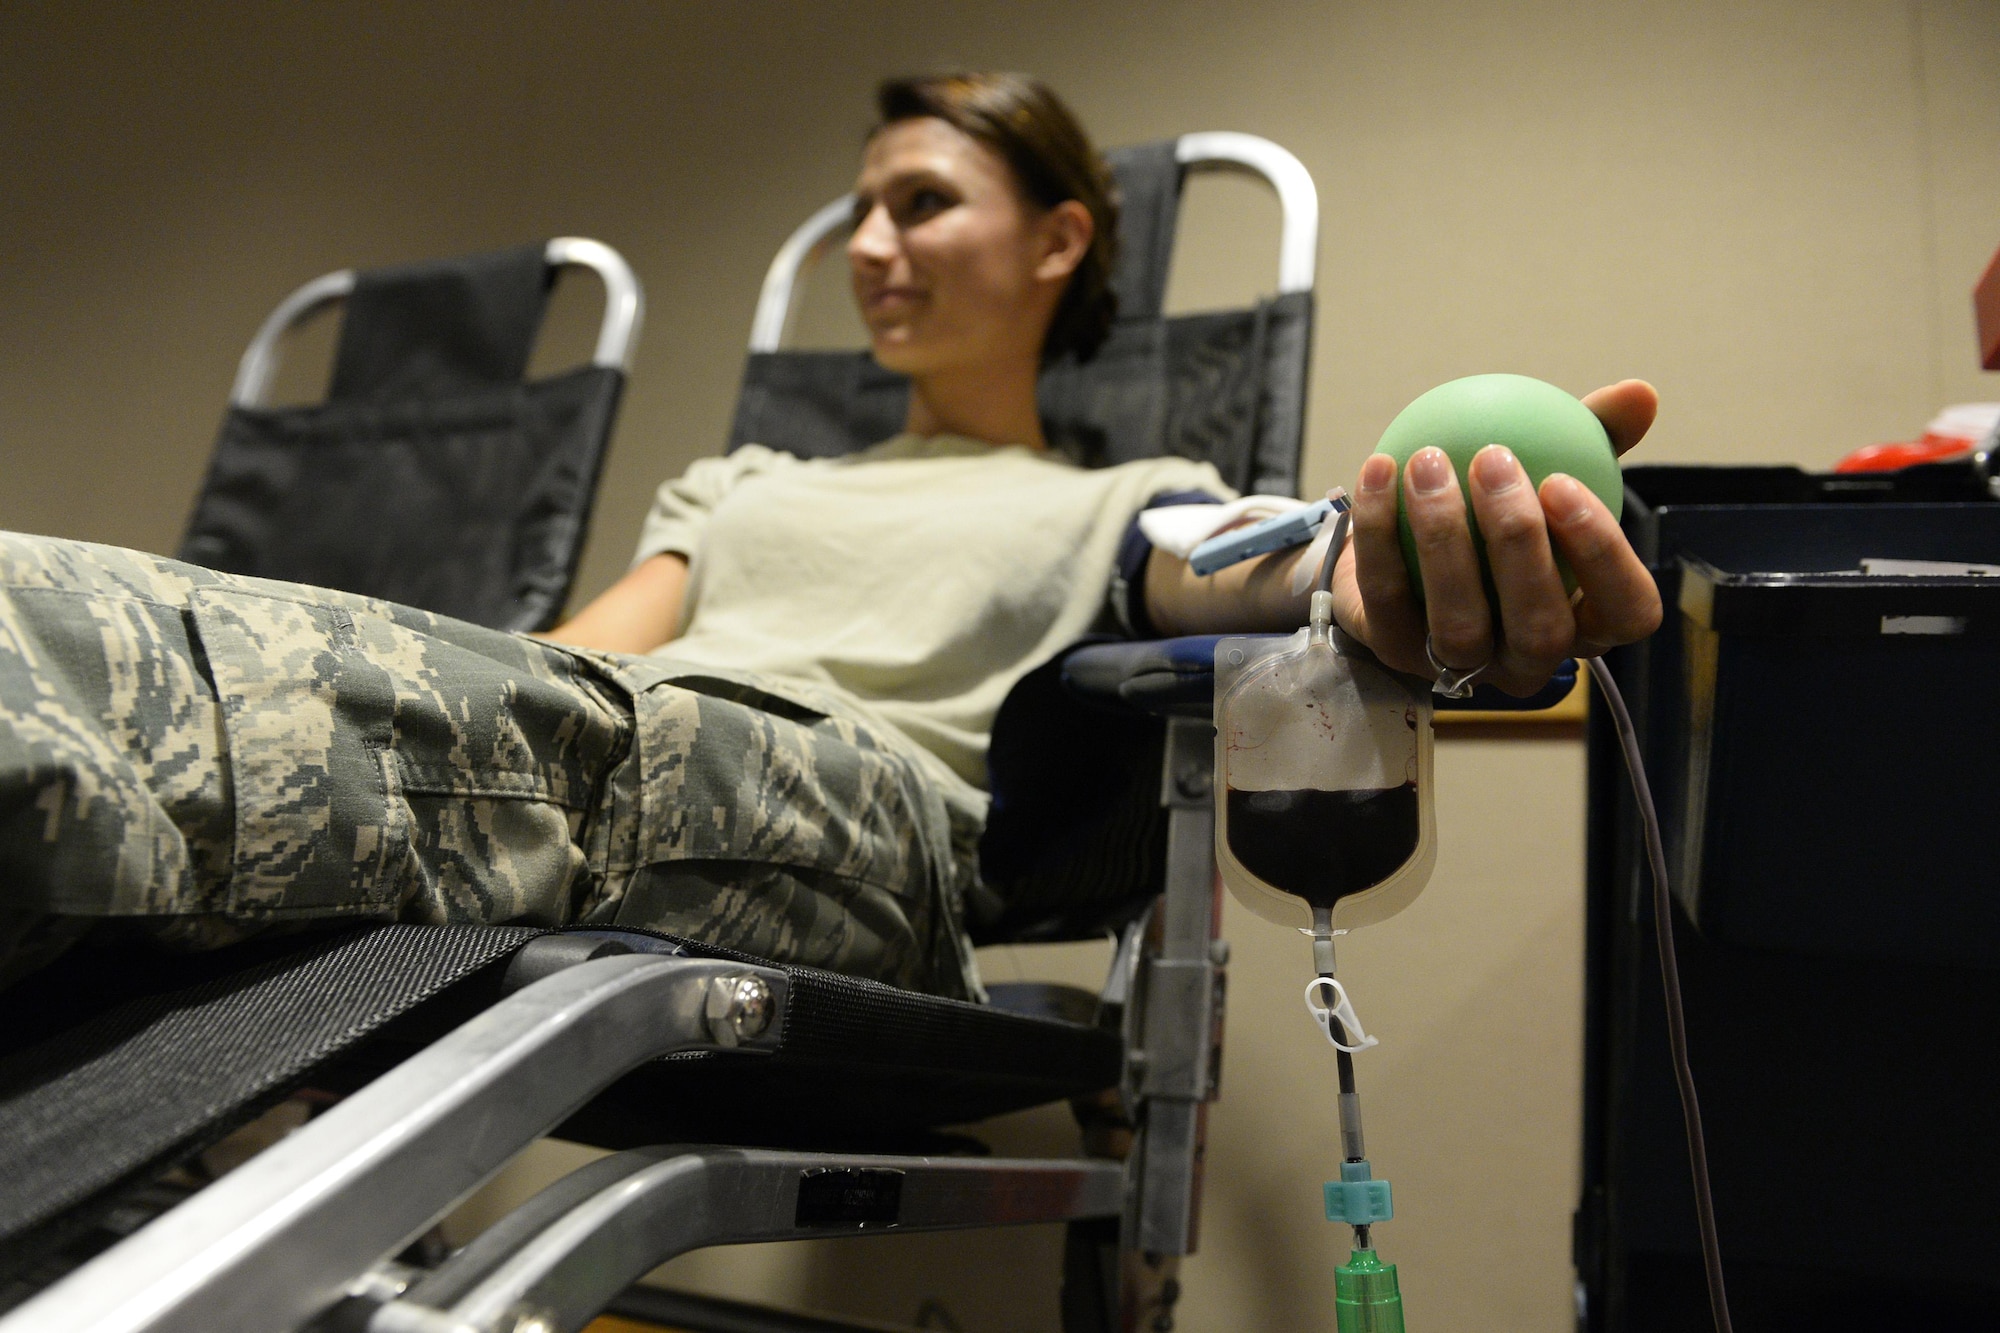 First Lt. Fanita Schmidt, a 4th Space Operations Squadron orbital analysis engineer, donates blood at the 3rd annual blood drive hosted by the 21st Medical Dental Squadron at Schriever Air Force Base, Colo., Oct. 6, 2015. Schmidt explained her decision to donate was based on personal experiences from her childhood, when she received a blood transfusion after a devastating car wreck. (U.S. Air Force photo/Christopher DeWitt)